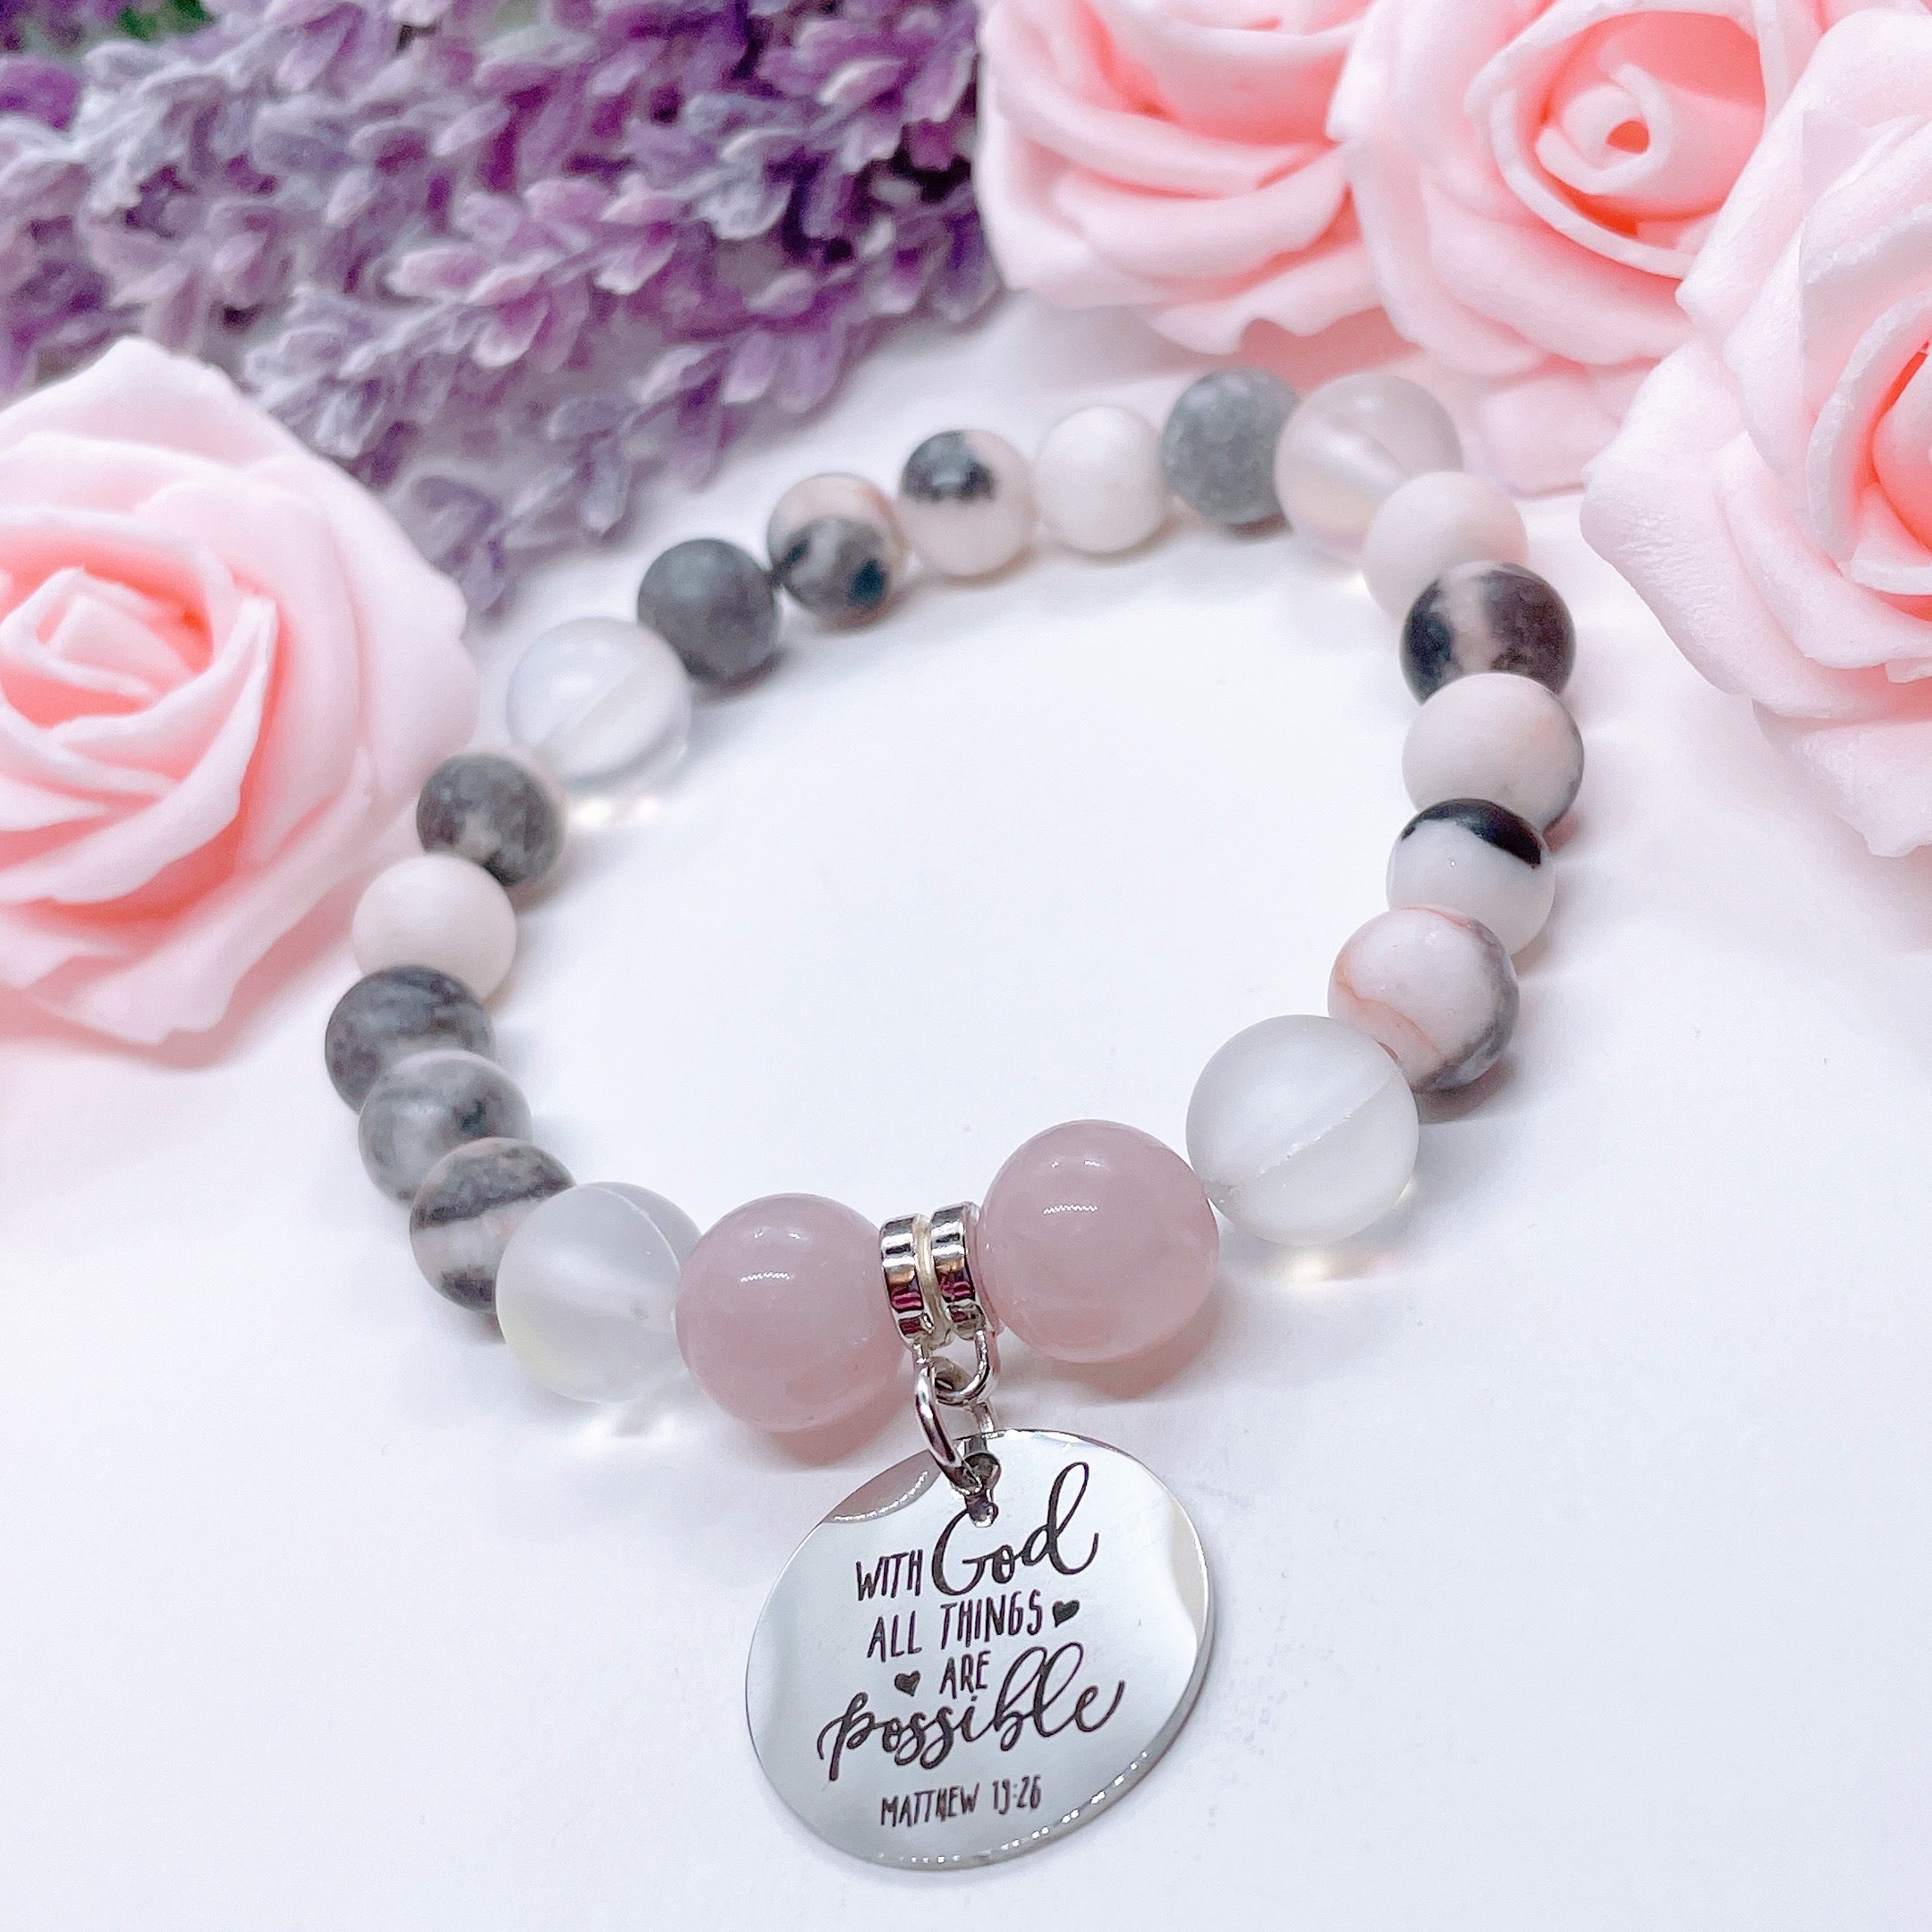 With God All Things are Possible Charm Bracelet